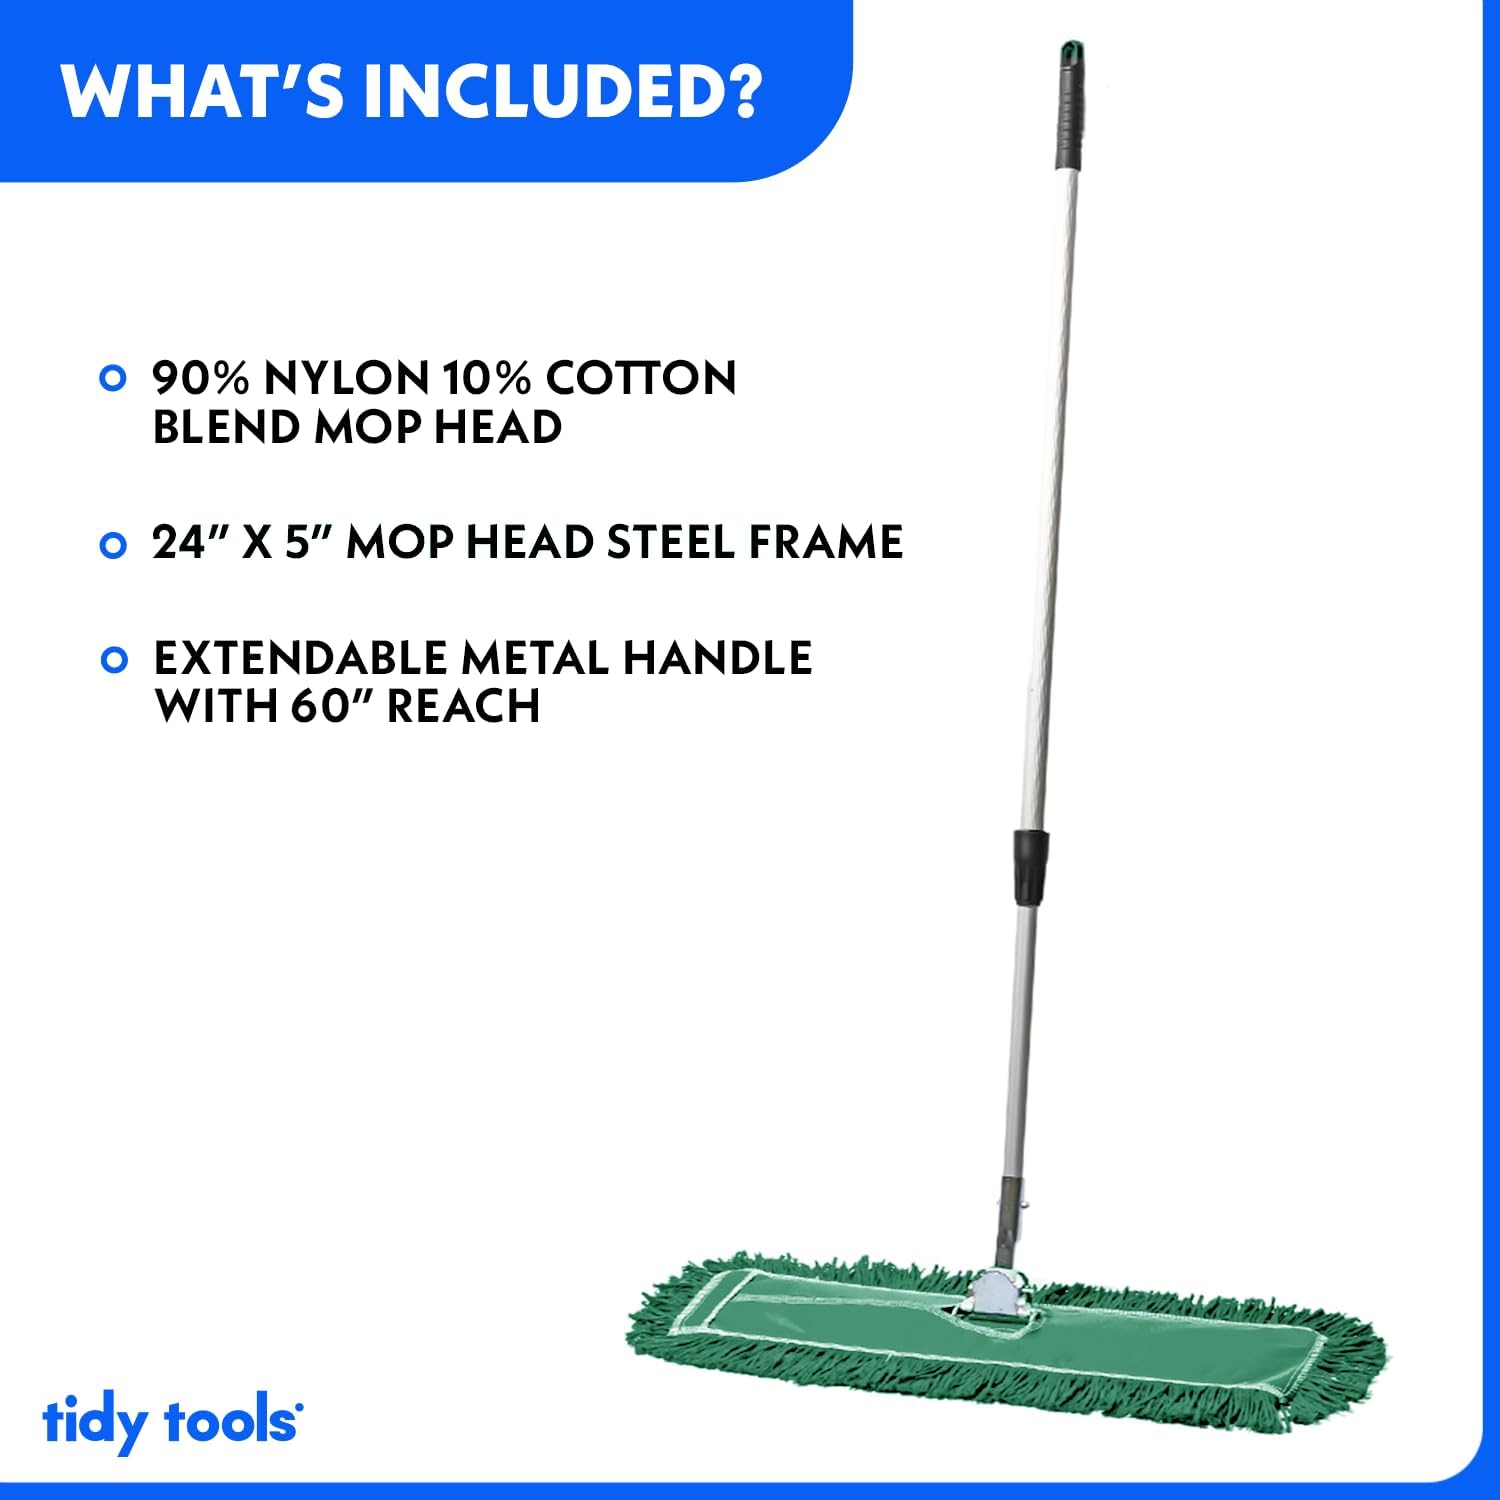 Tidy Tools 24 inch Dust Mop Kit Extendable Handle, Green